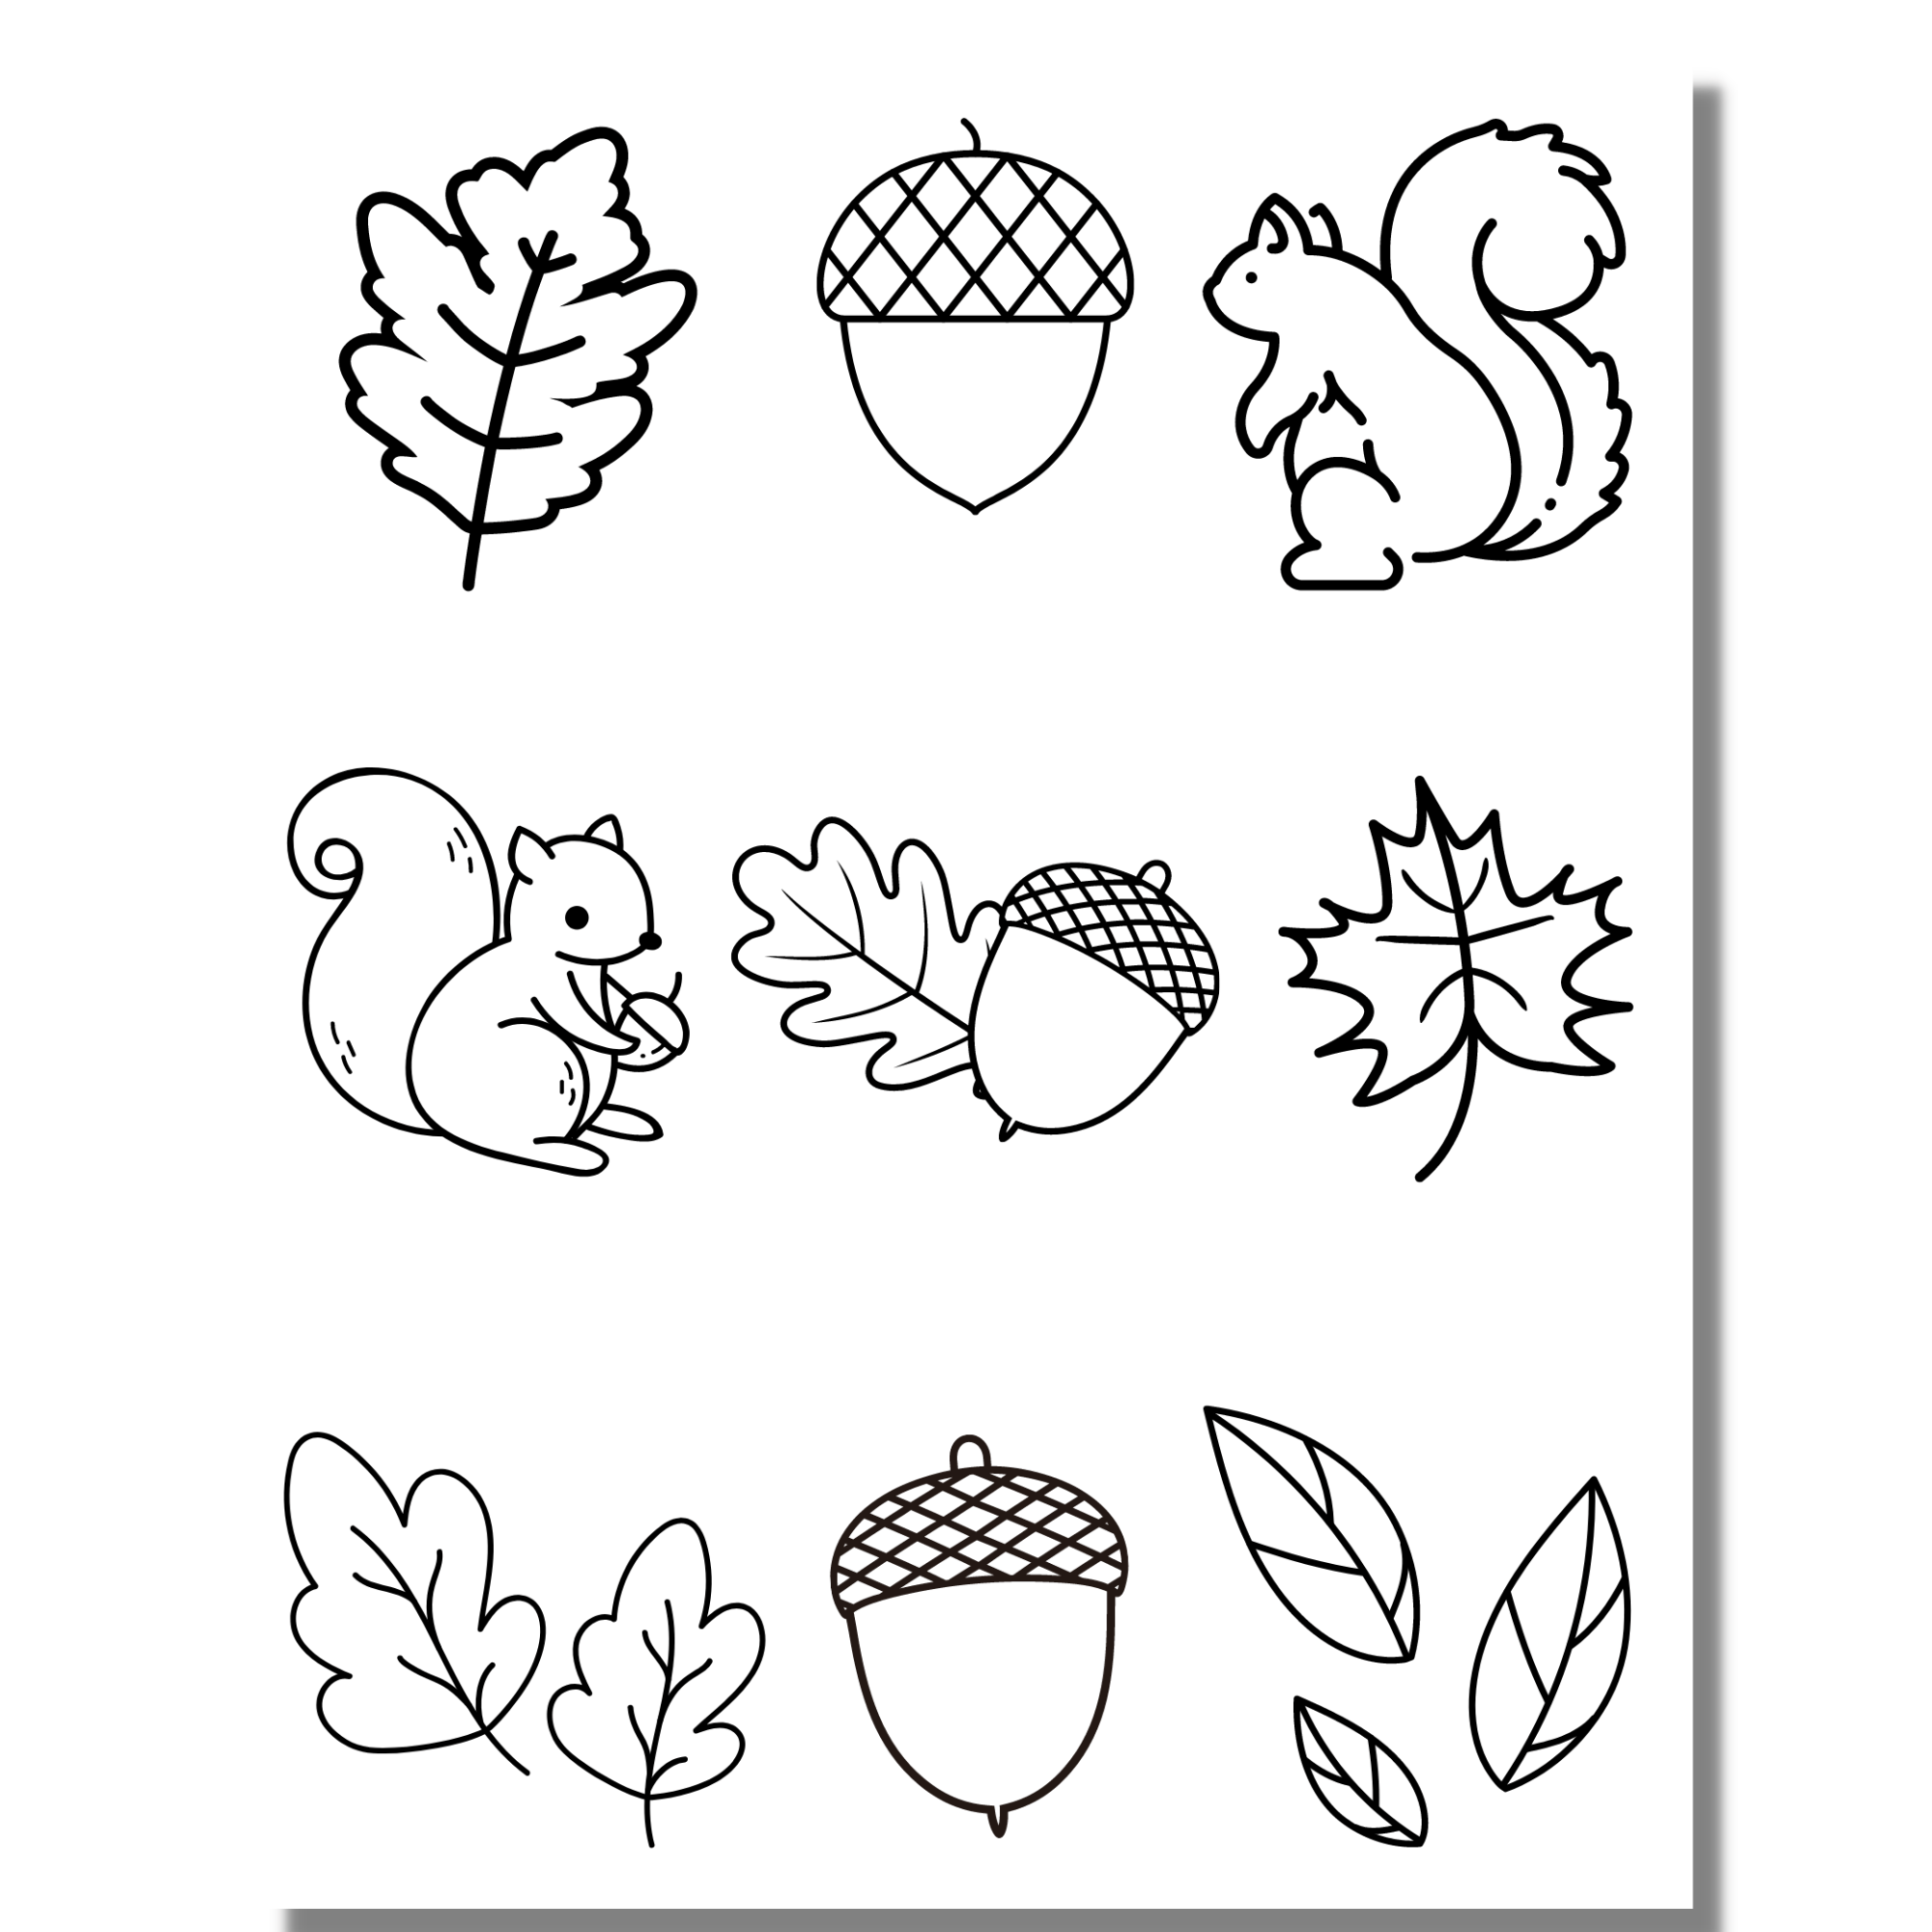 Fall coloring pages for kids â at home with zan printables